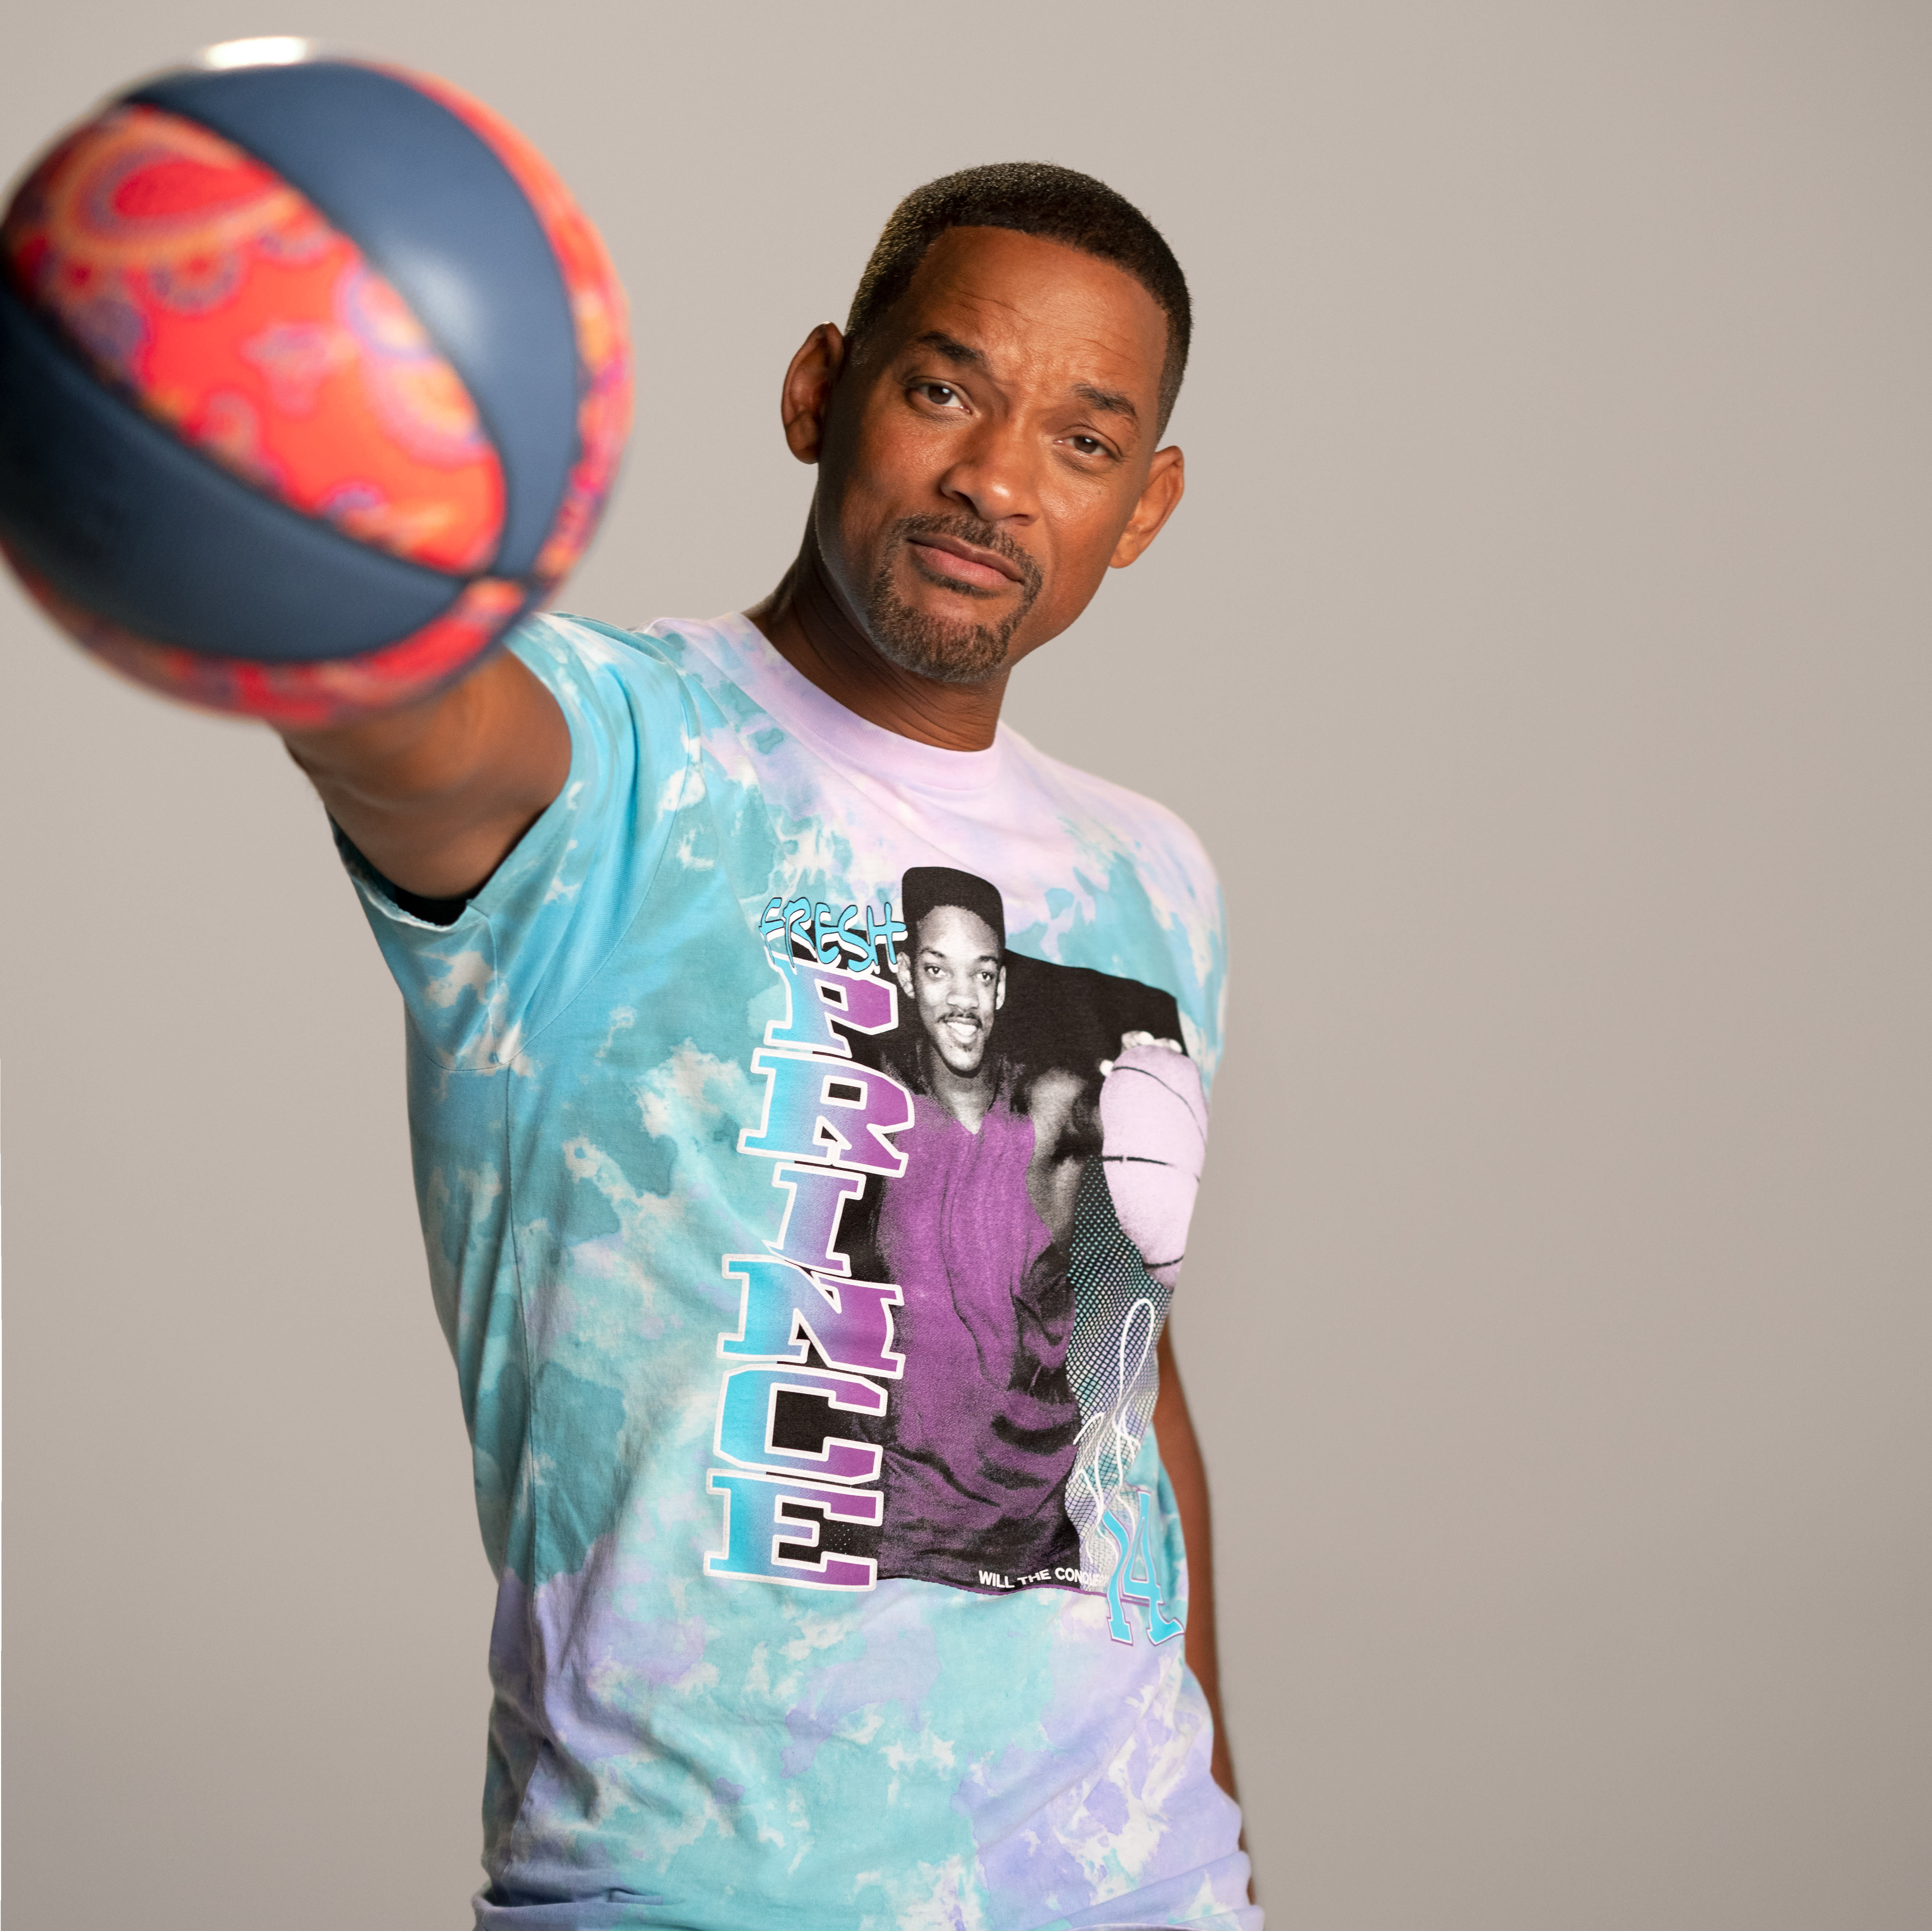 Will Smith Drops Limited Edition Bel-Air Athletics Collection